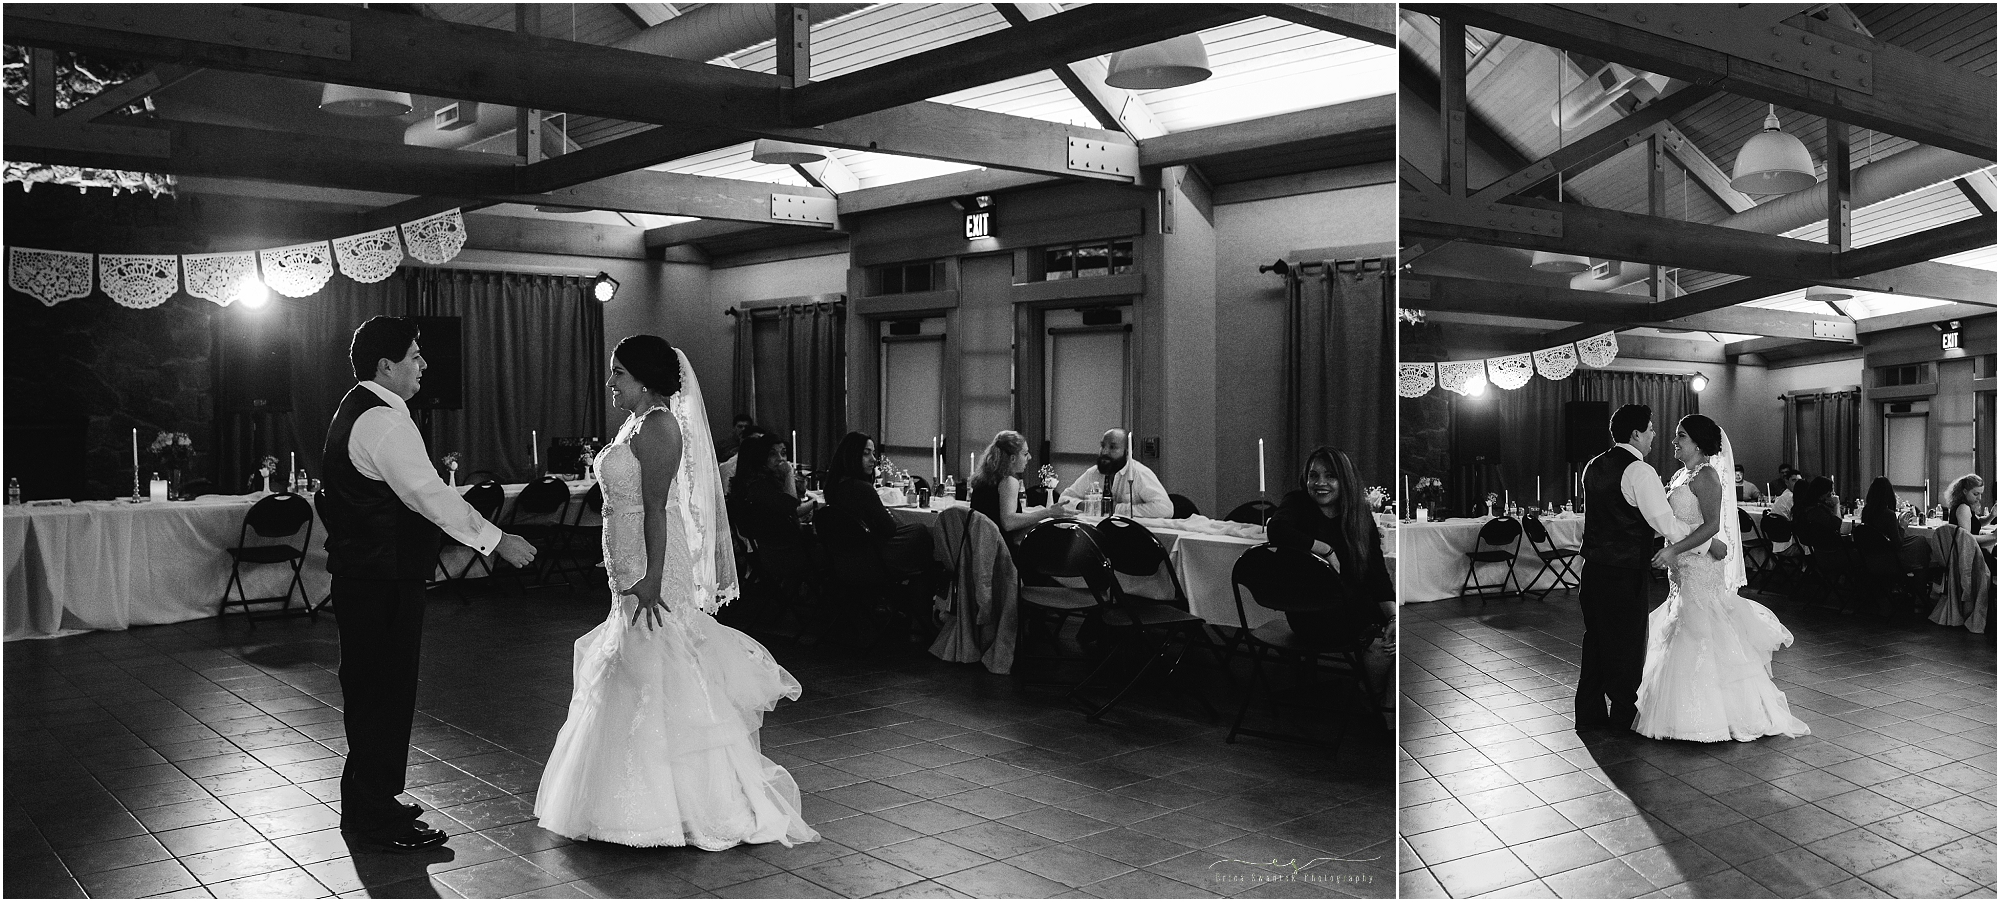 The wedding couple enjoys their first dance surrounded by friends and family at Aspen Hall in Bend, Oregon. 